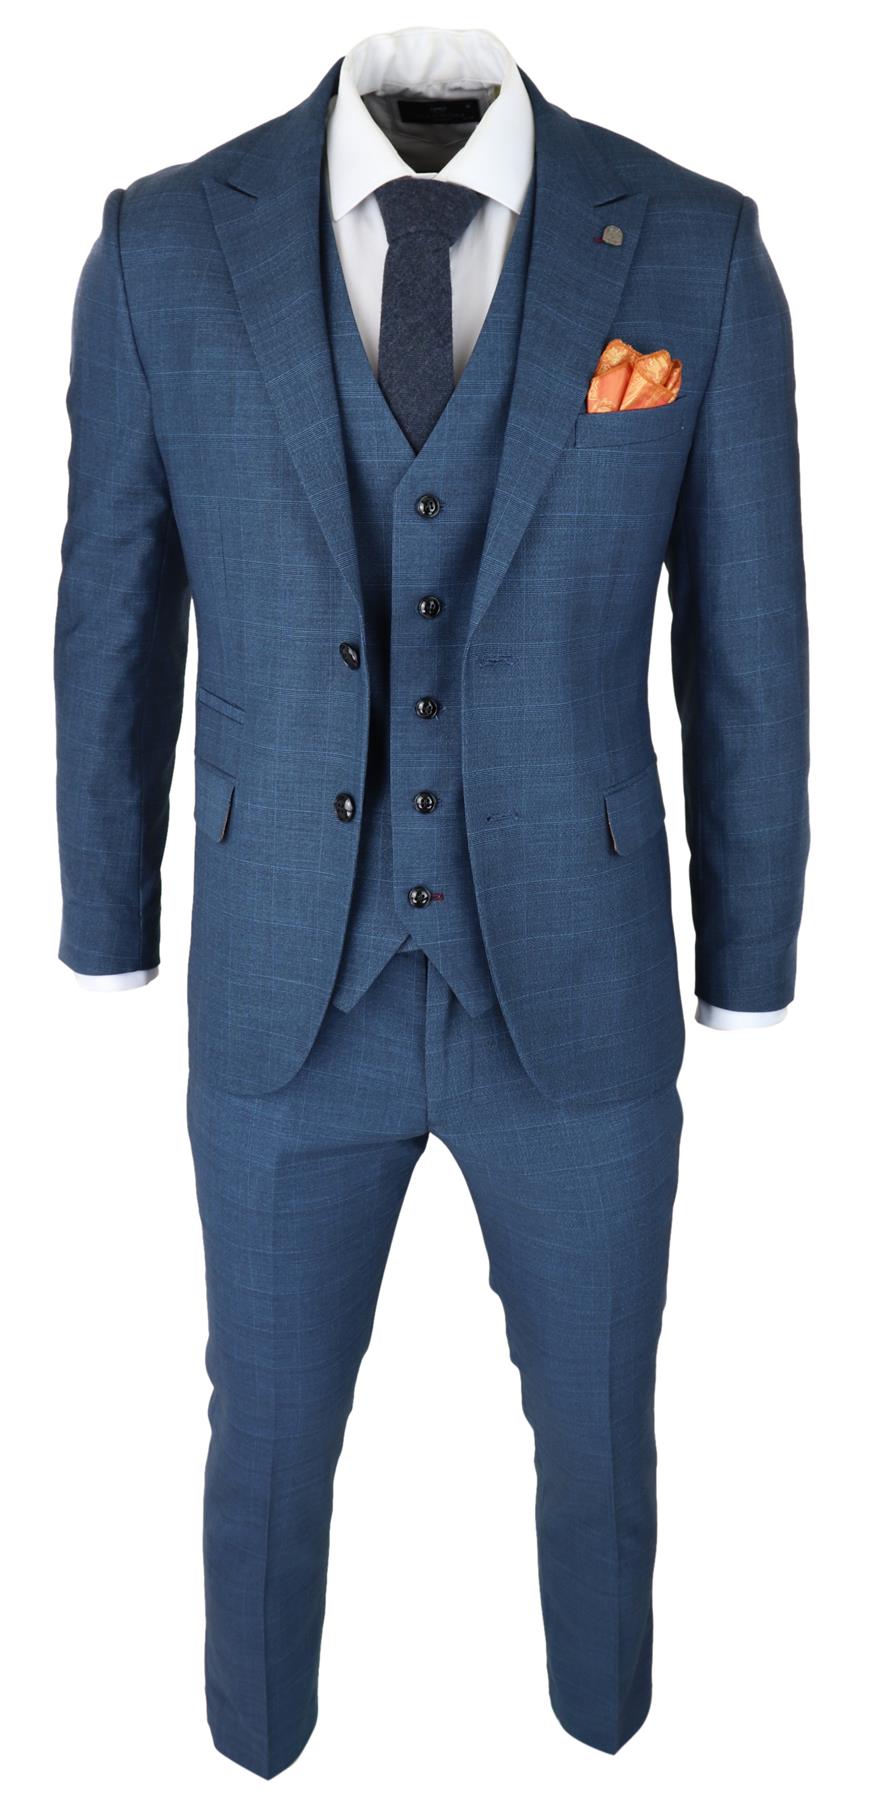 Mens 3 Piece Blue Suit Prince Of Wales Check Classic Light Tailored Fit Modern